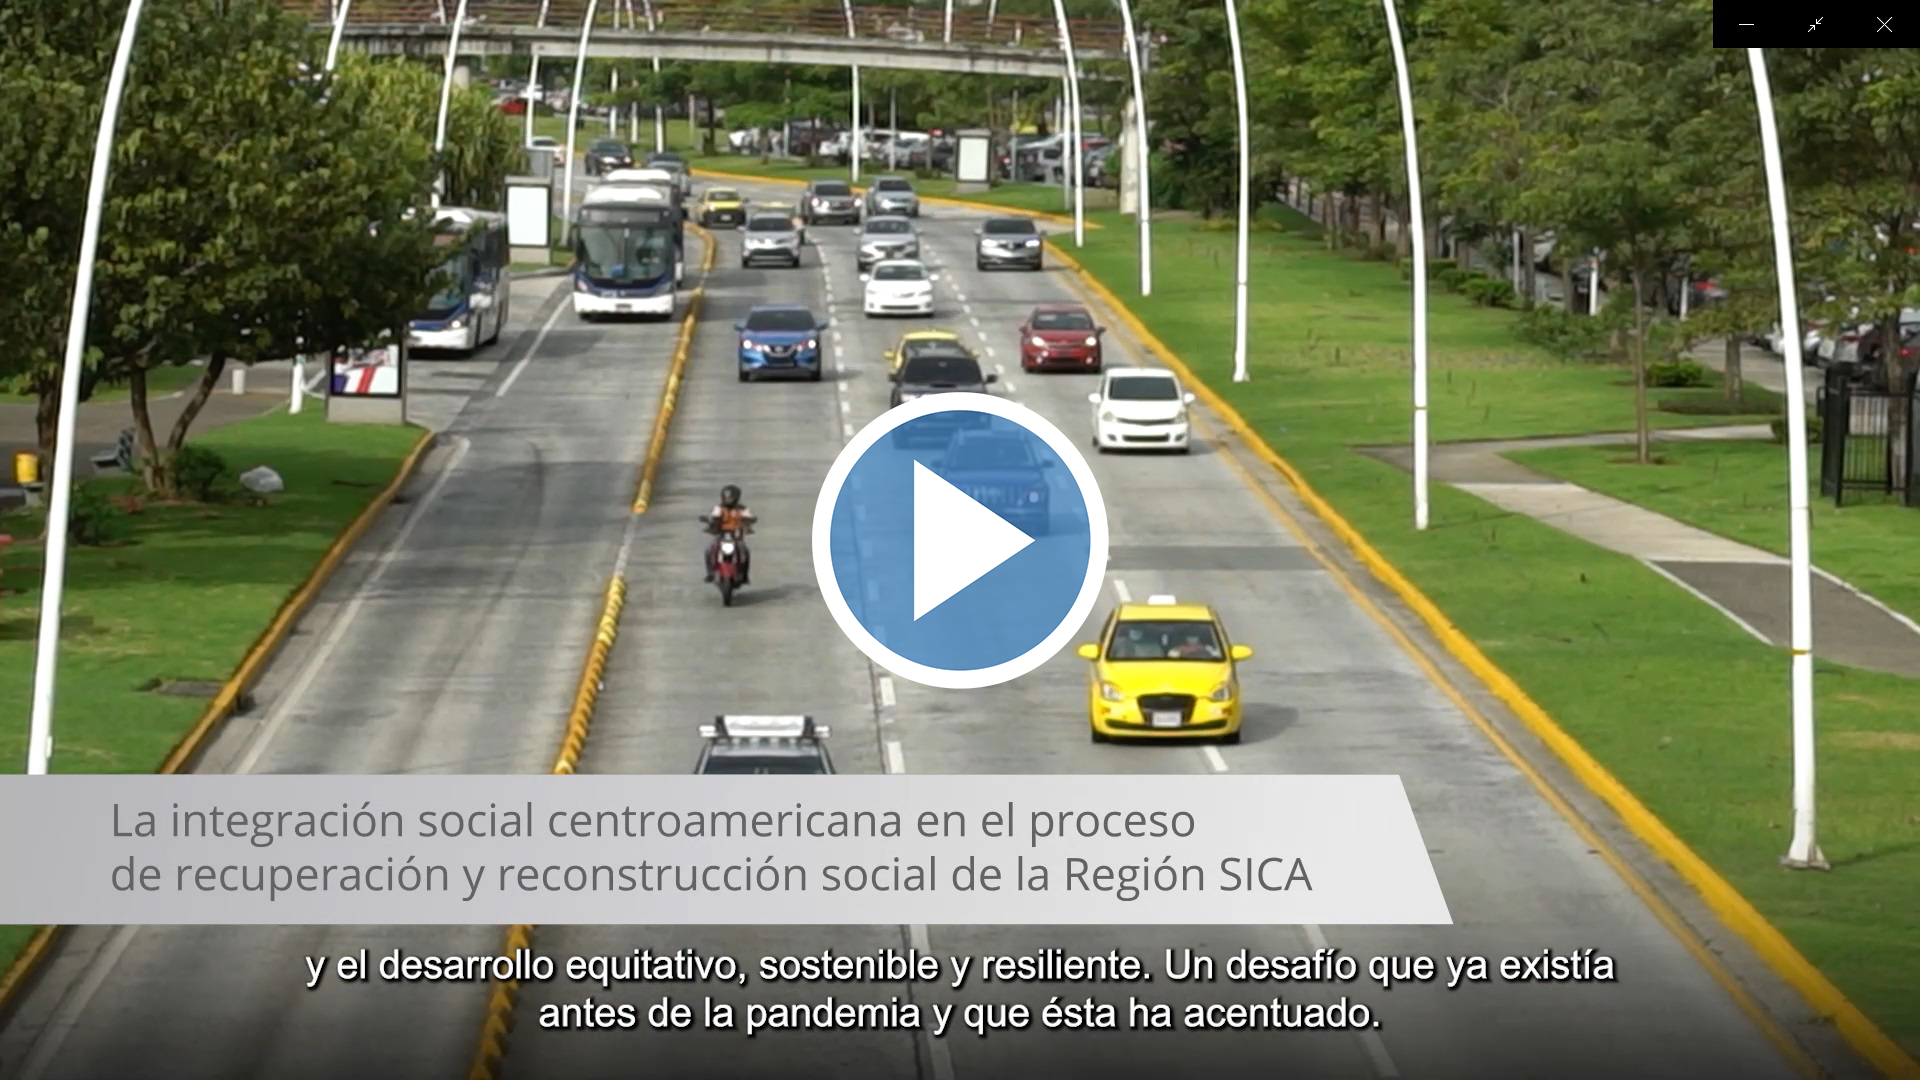 Central American social integration in the process of social reconstruction of the SICA region